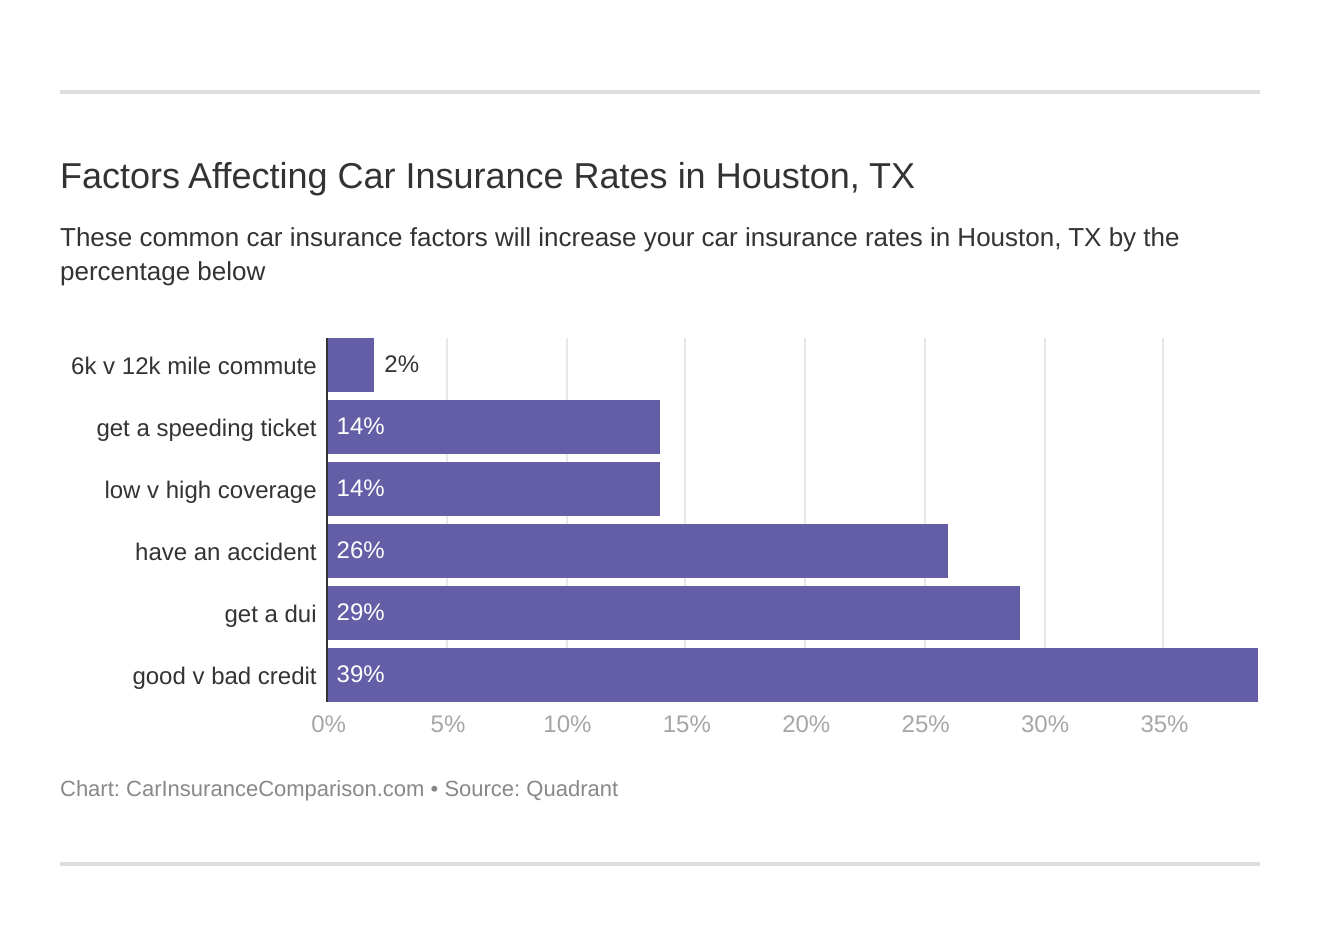 Factors Affecting Car Insurance Rates in Houston, TX